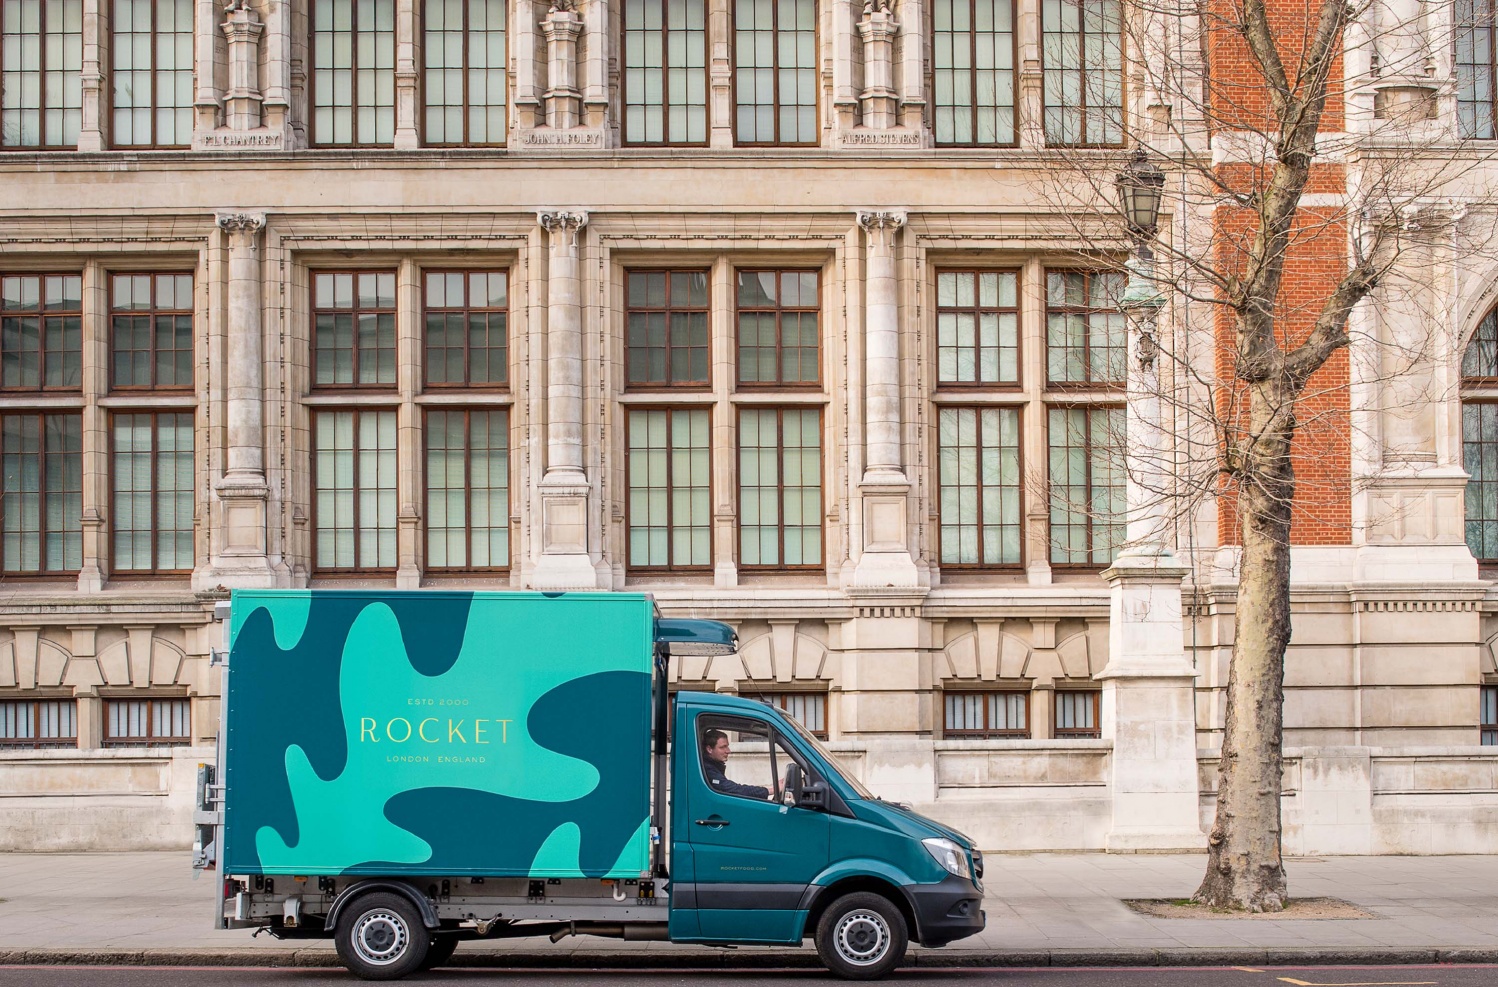 Logo, pattern, stationery and van livery by London-based studio Here Design for UK catering business Rocket